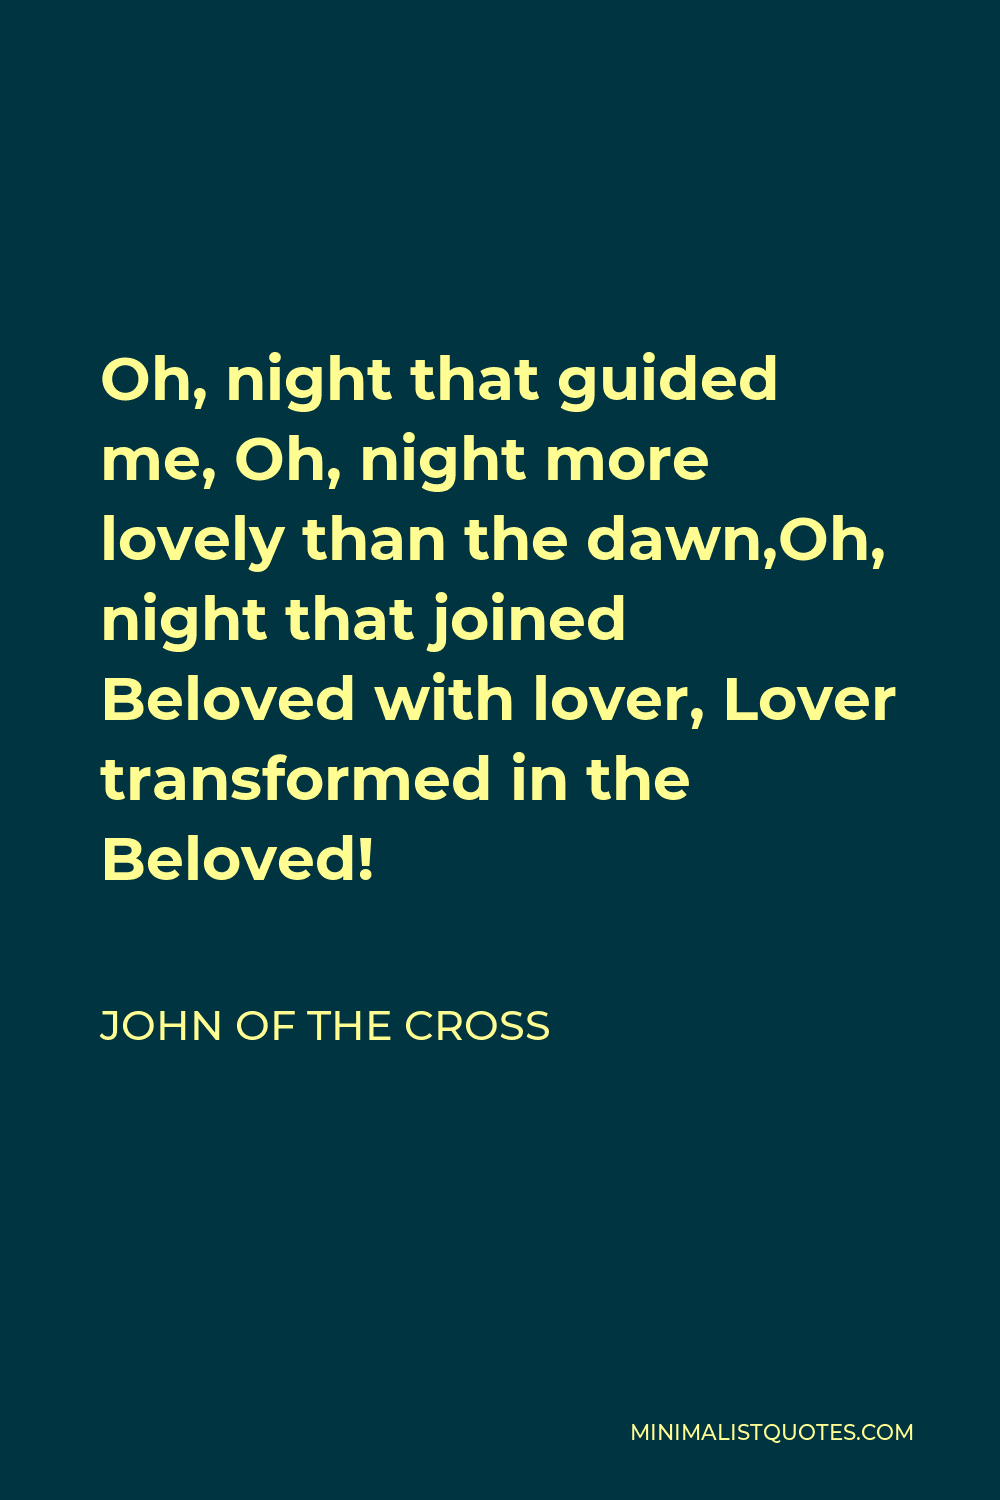 John of the Cross Quote - Oh, night that guided me, Oh, night more lovely than the dawn,Oh, night that joined Beloved with lover, Lover transformed in the Beloved!